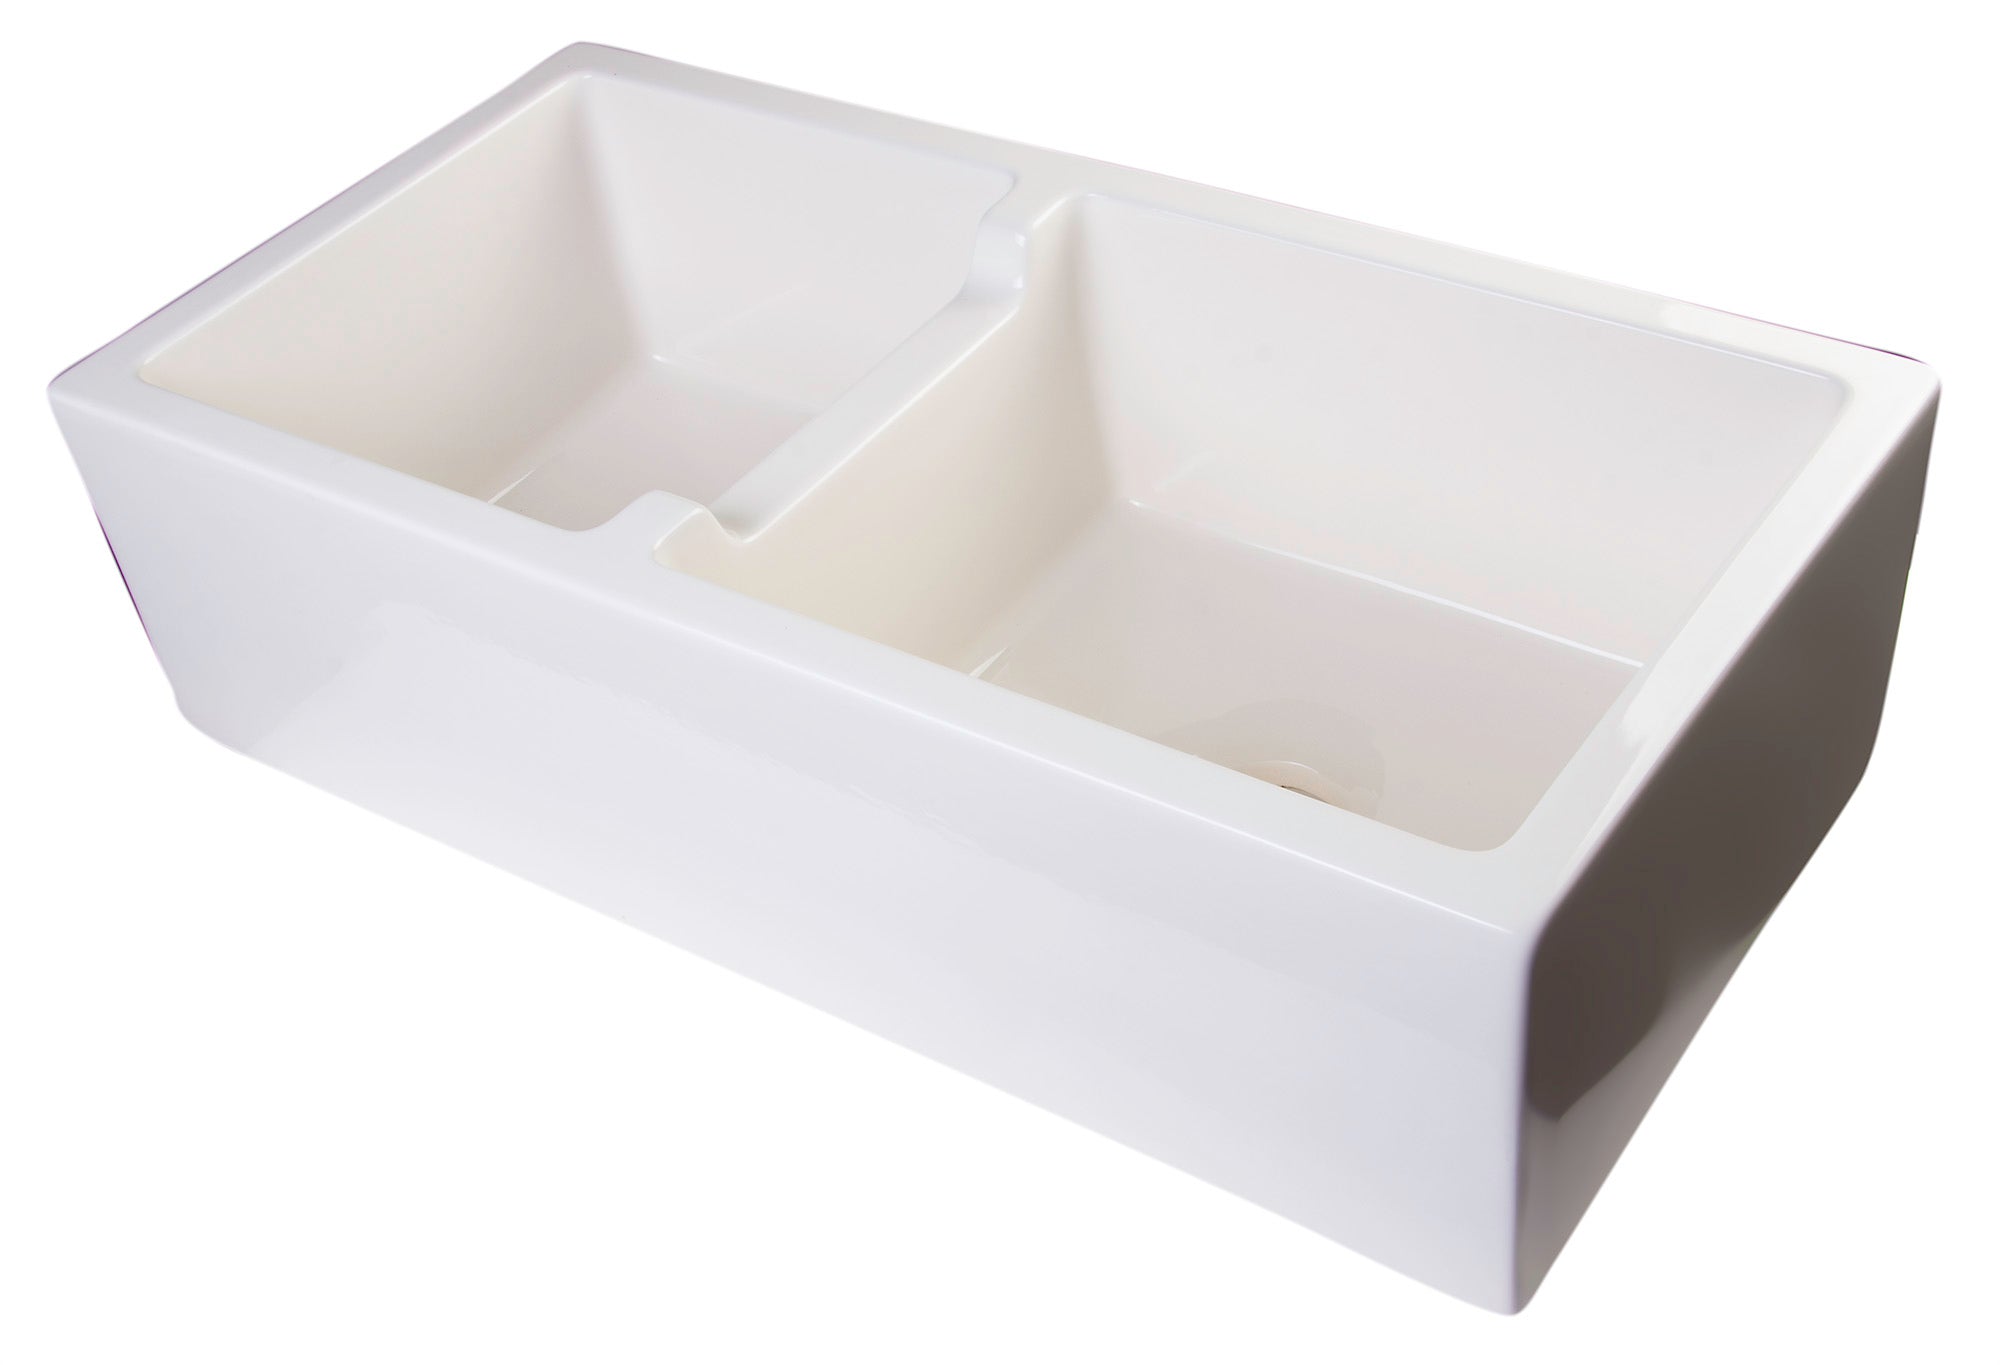 ALFI Brand - 36" Biscuit Smooth Apron Thick Wall Fireclay Double Bowl Farm Sink | AB3618DB-B